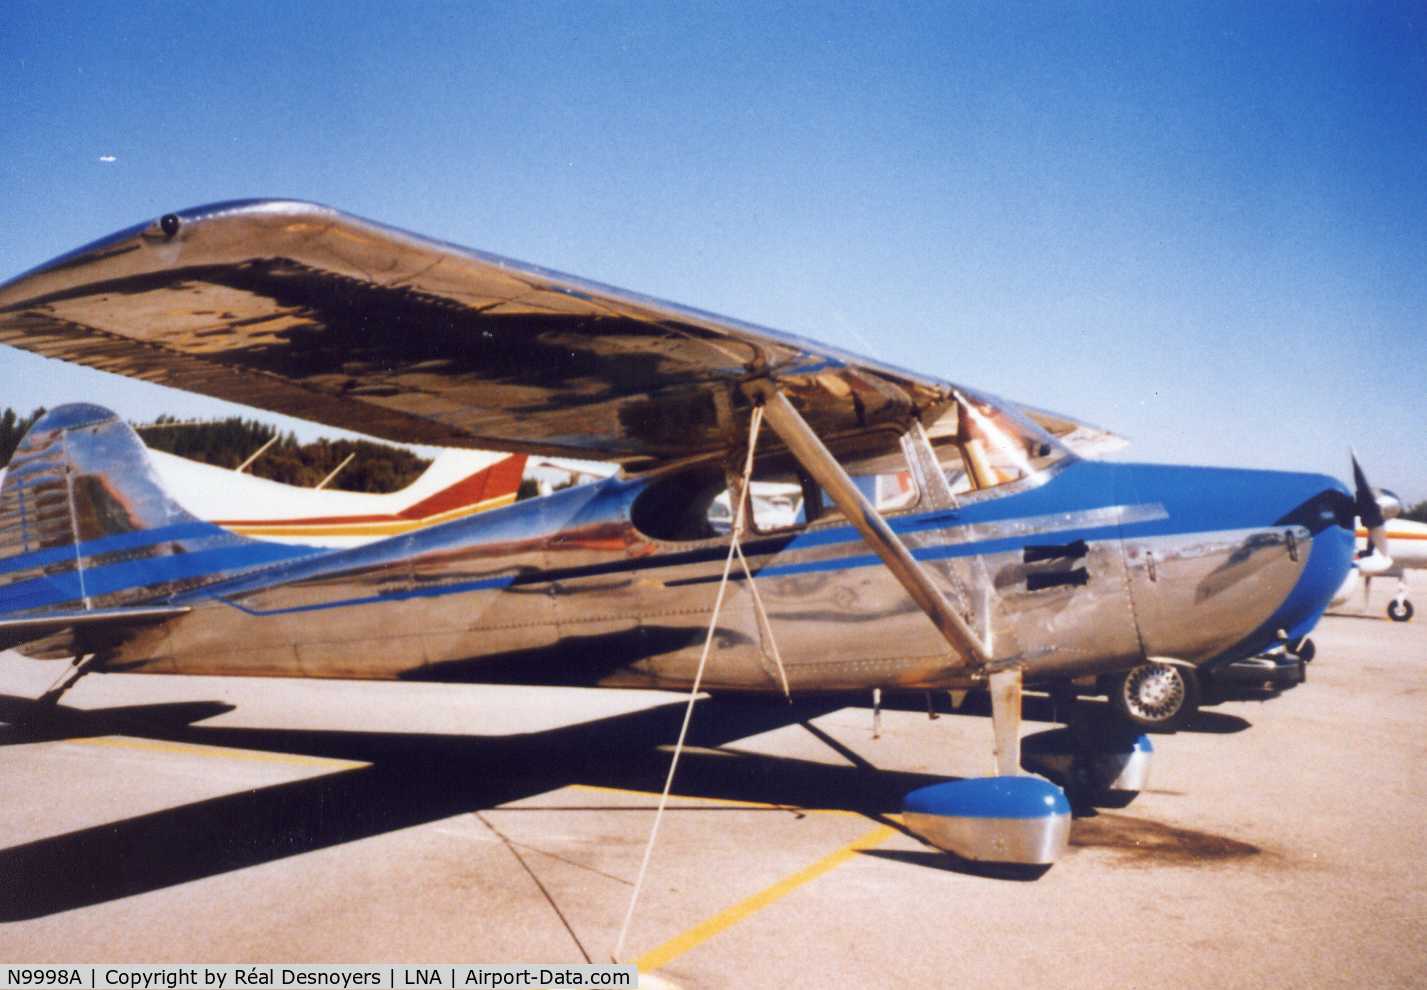 N9998A, 1950 Cessna 170A C/N 19433, Taken around 1989 in LNA (Palm Beach County Park) Airport. This aircraft had just been flown in from Colorado Springs where if was purchased by a Florida resident new owner.